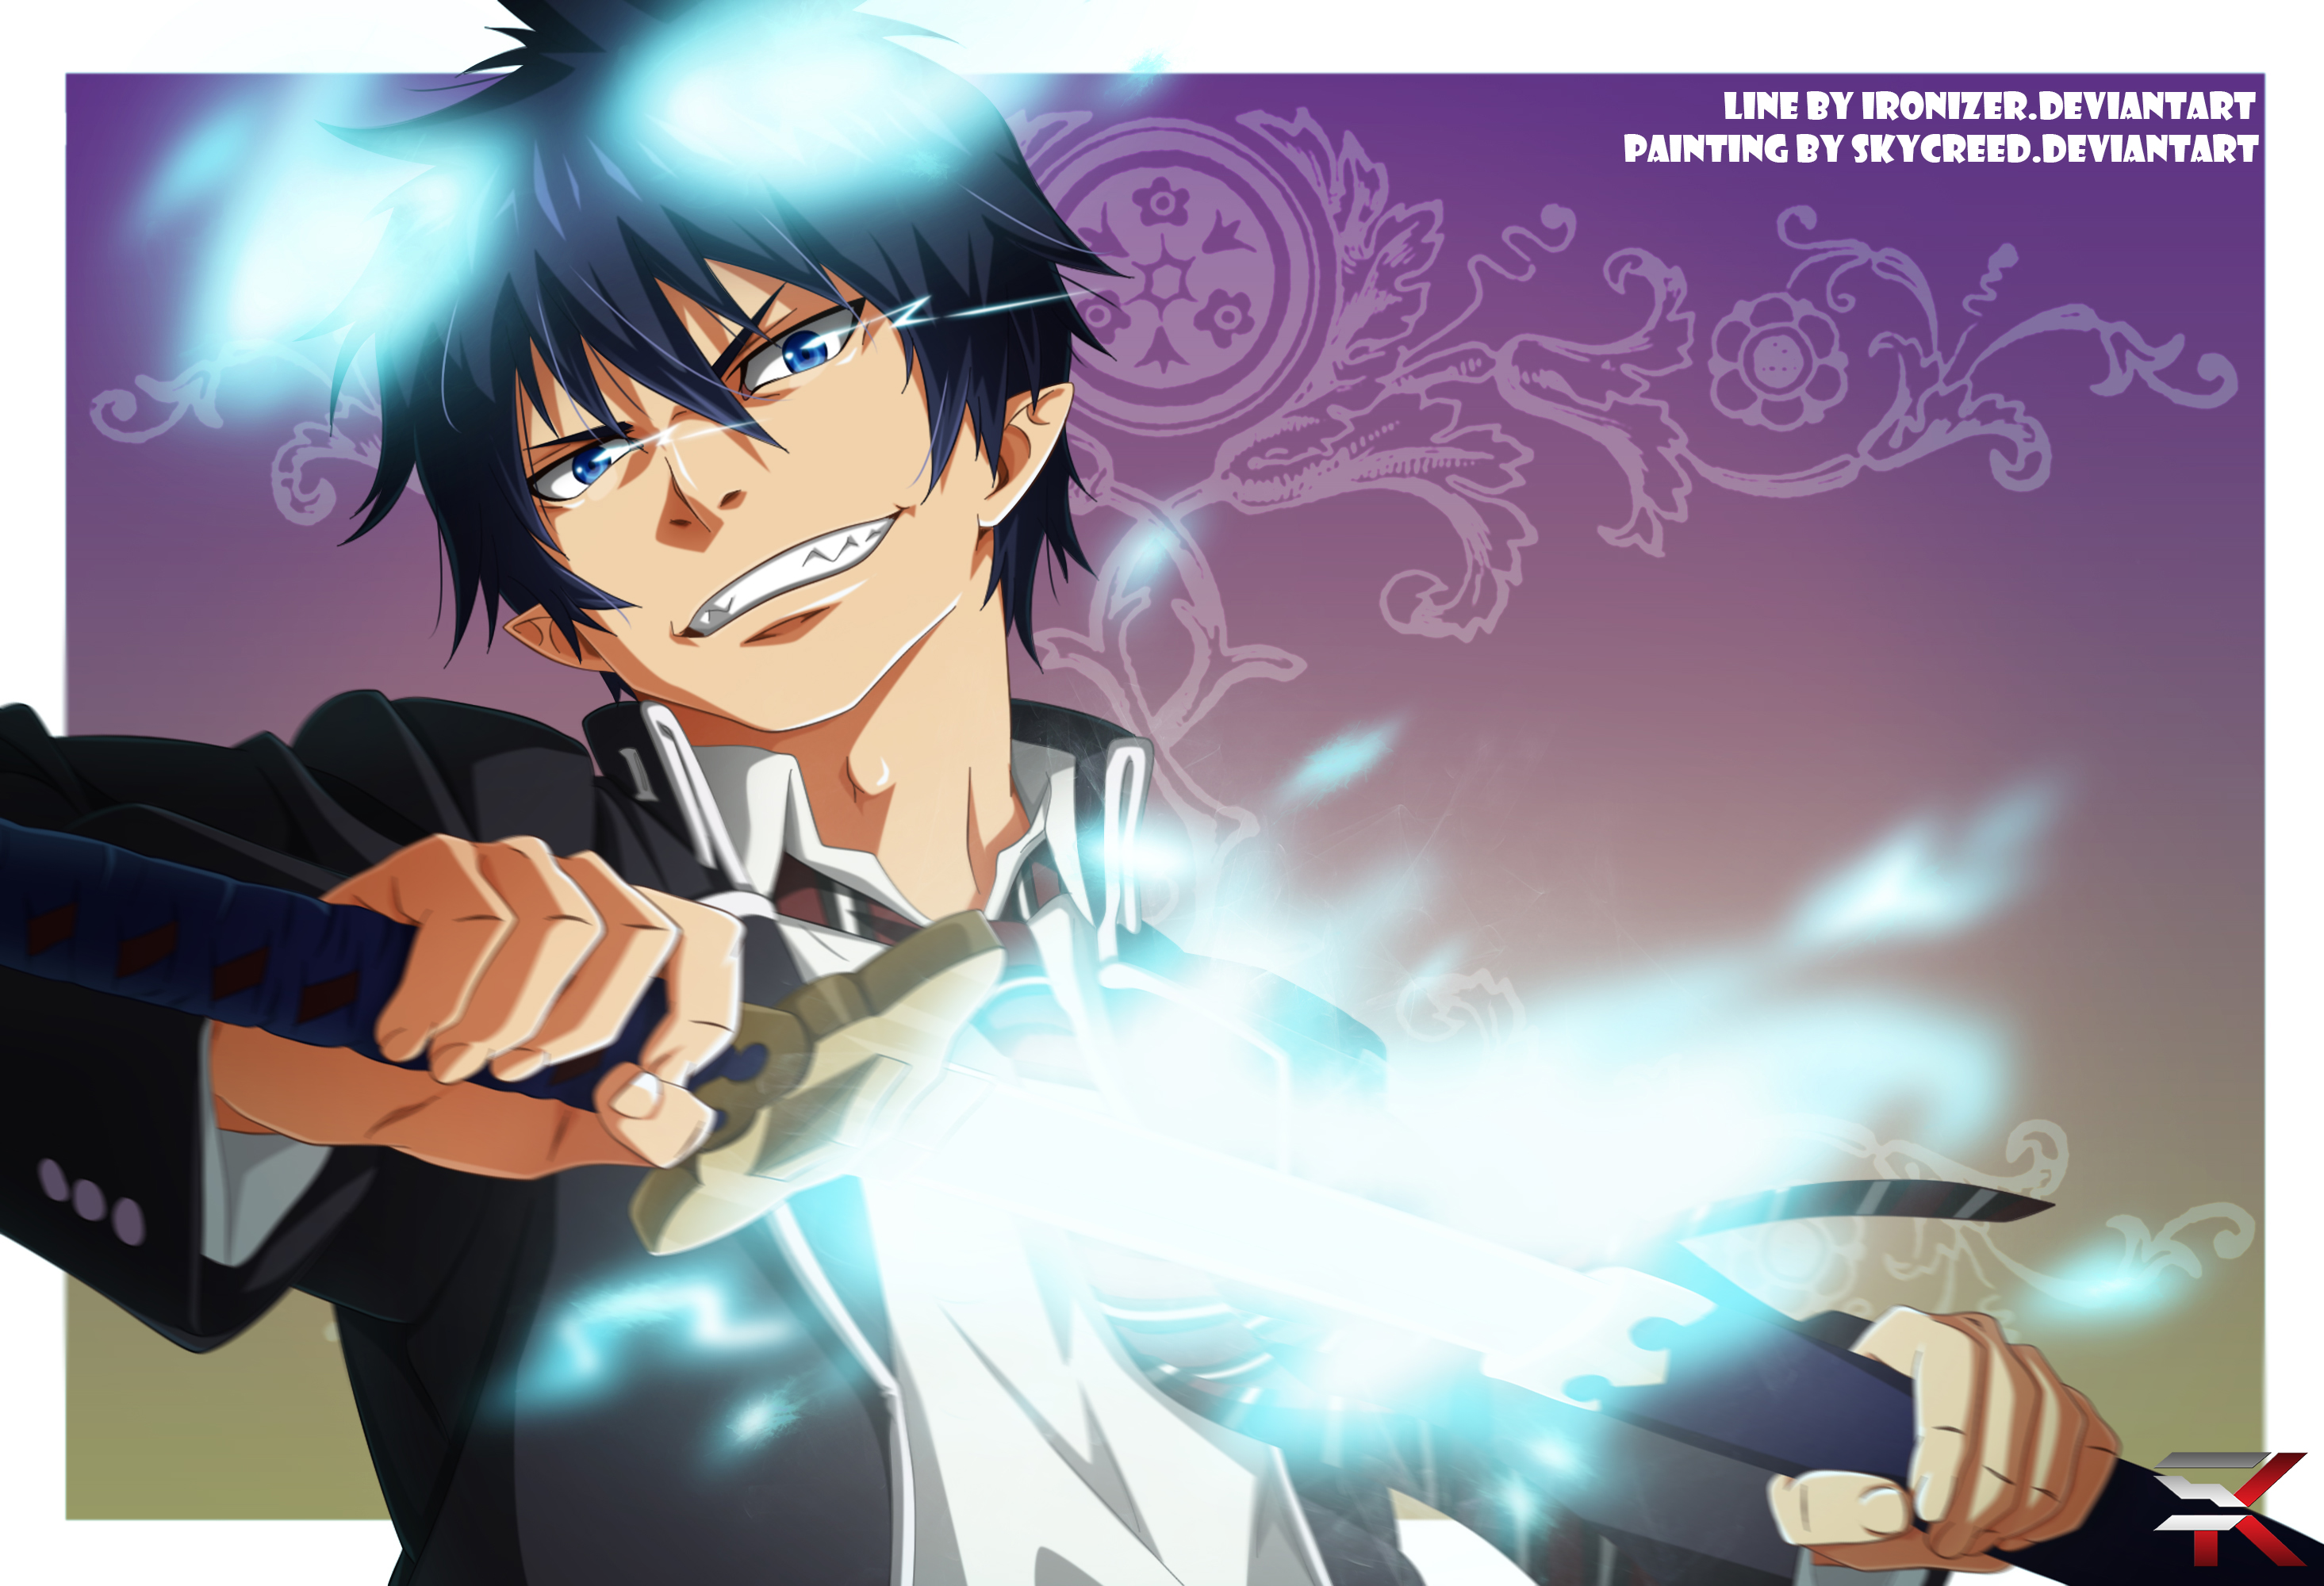 1. "Blue Exorcist" - wide 7